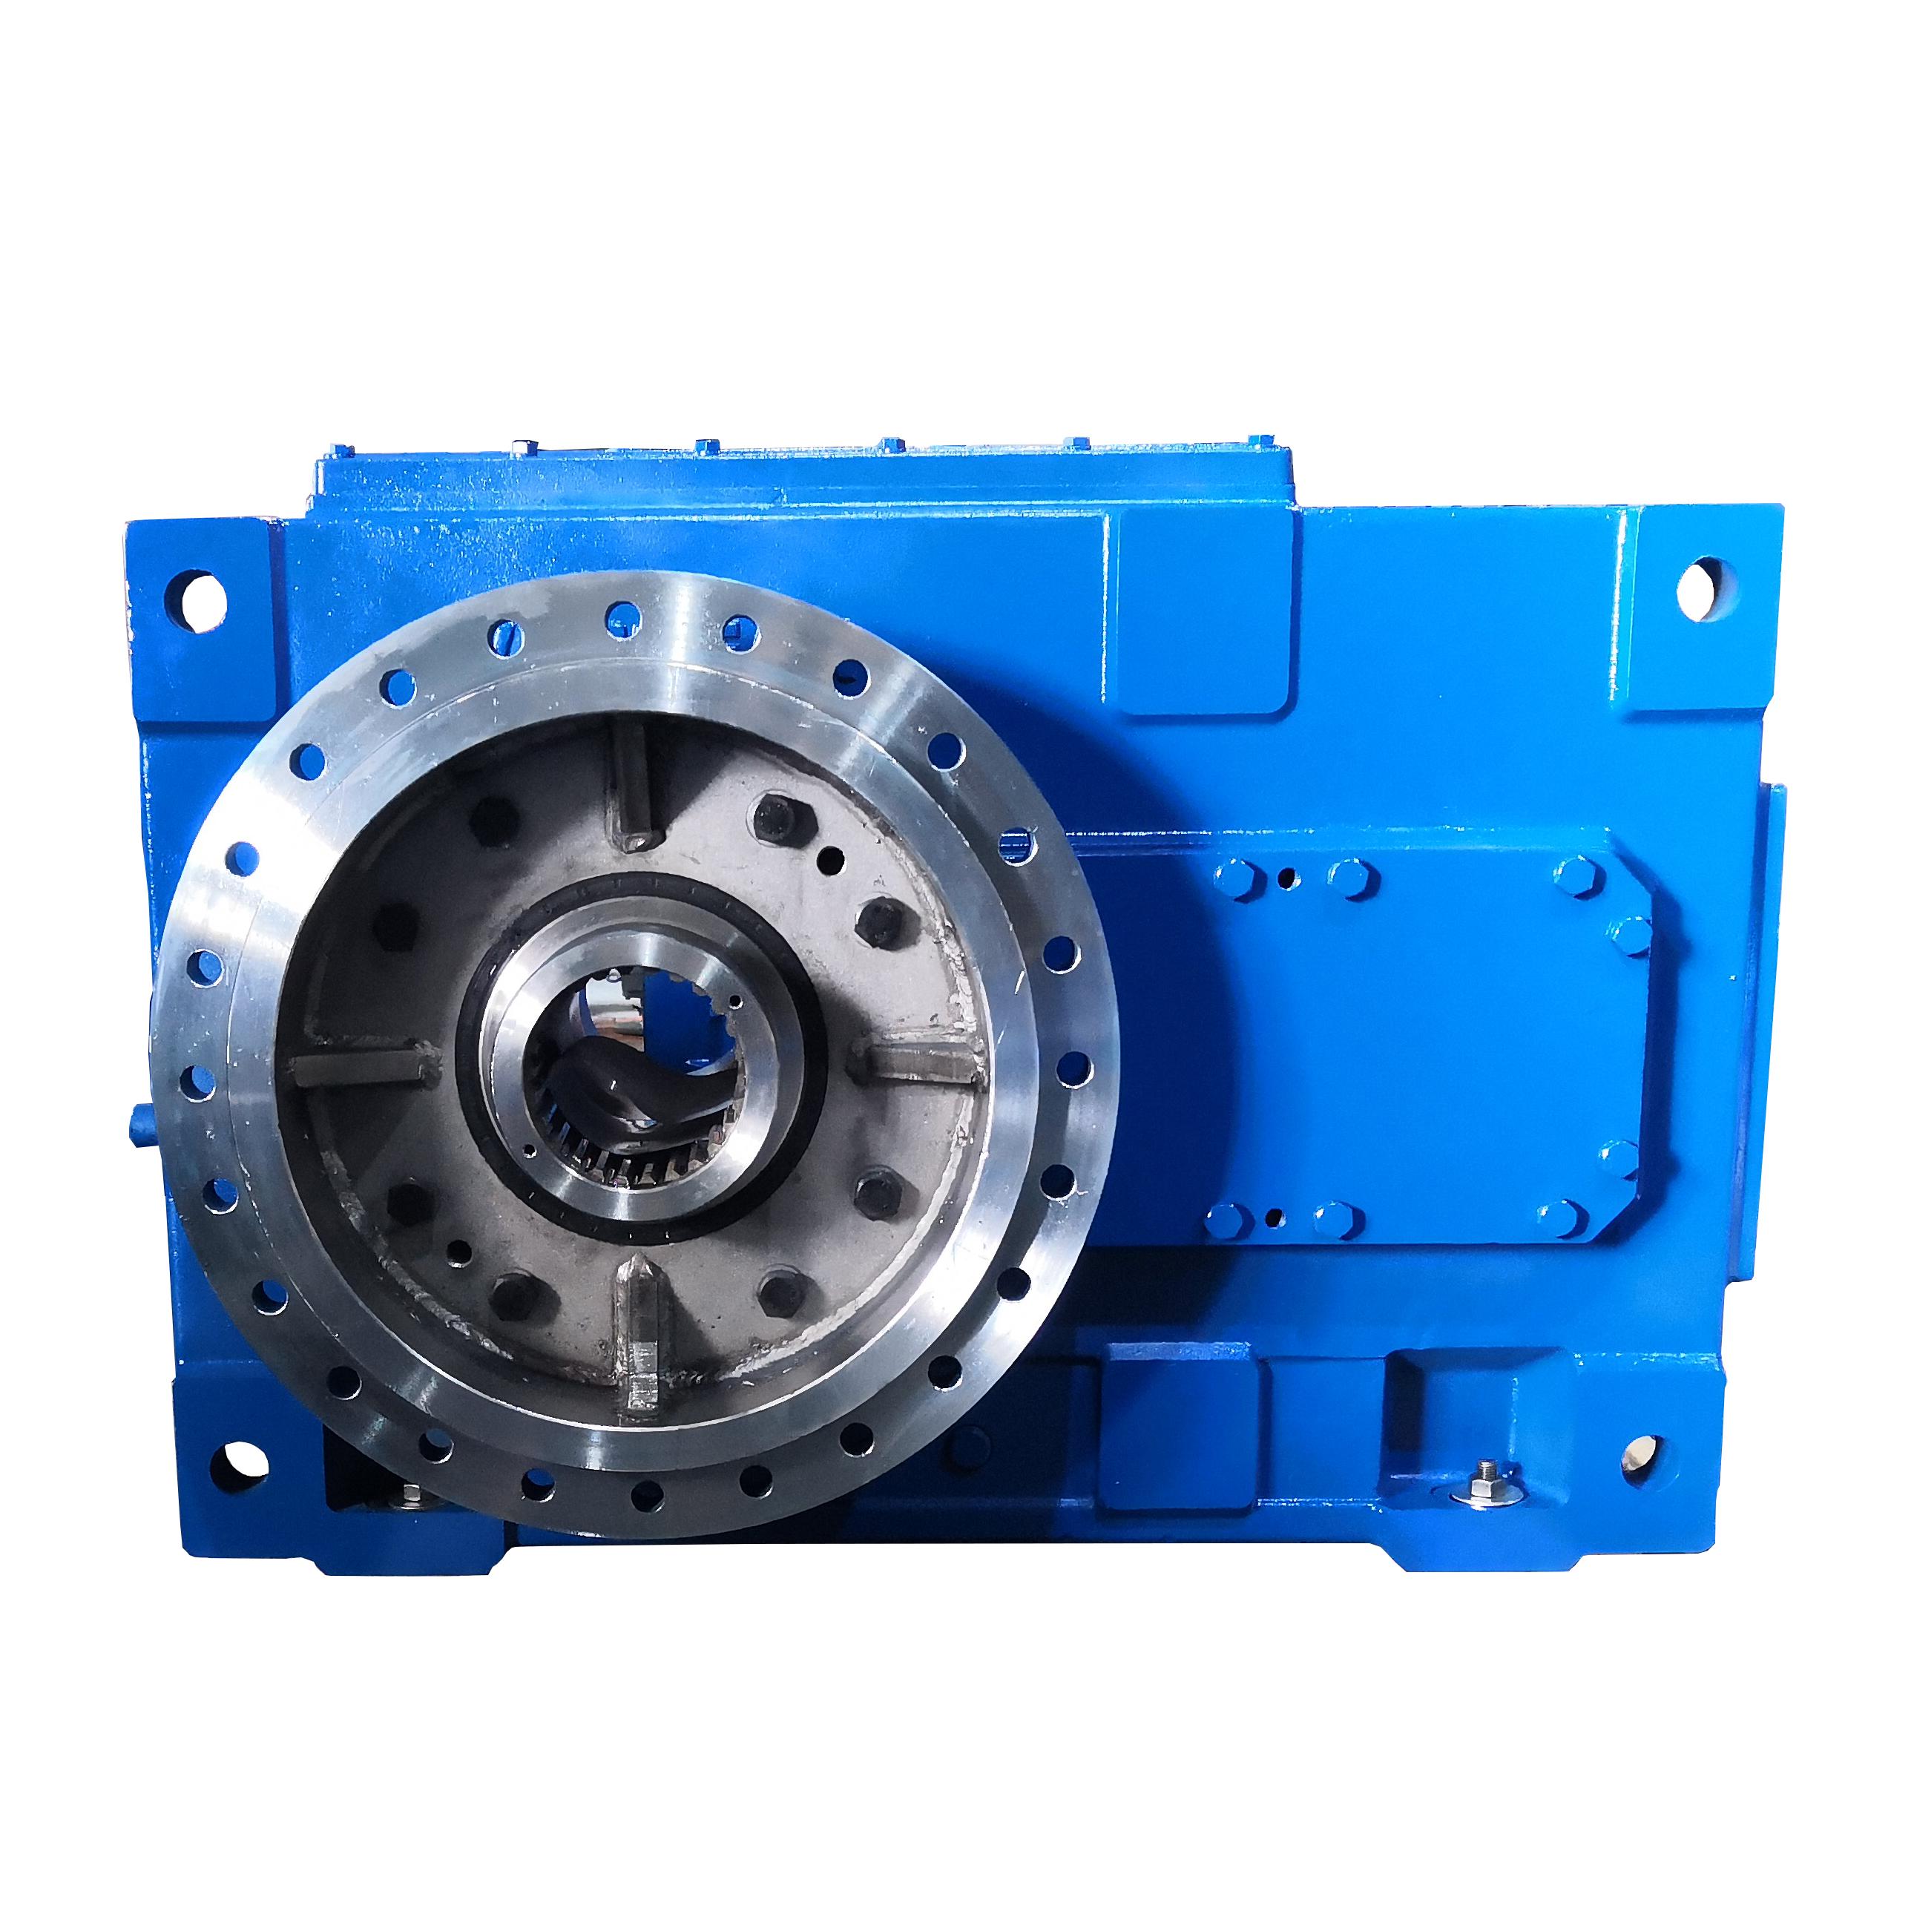 ZSY gearbox model type hard tooth helical gear Marine Gear Box/ Gearbox/ Gear Reducer